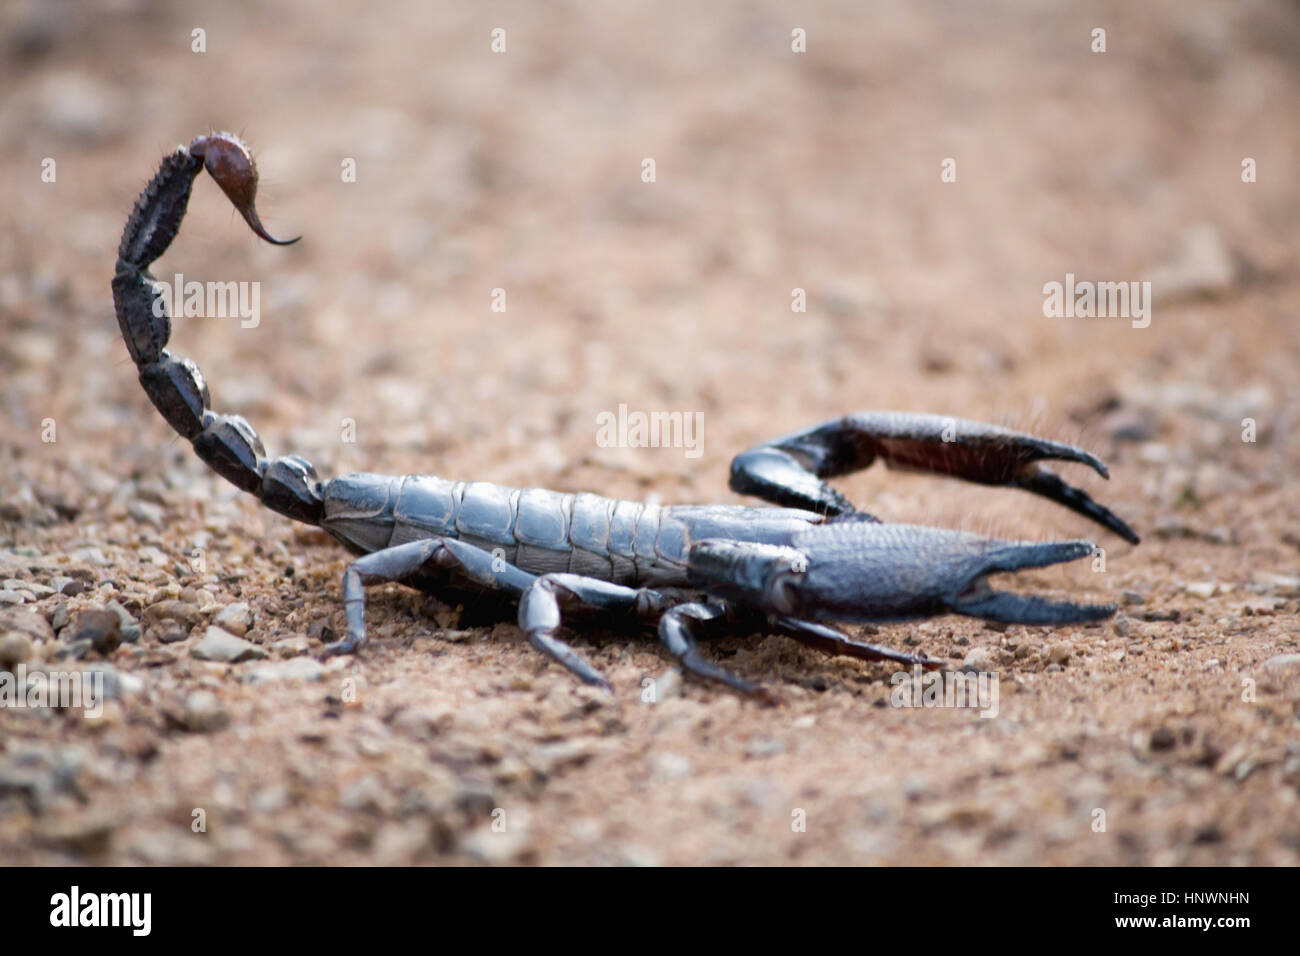 Burrowing scorpion, Heterometrus sp., Achanakmar Tiger Reserve, Chhattisgarh. Large scorpion with massive pincers. Male has markedly larger pincers th Stock Photo